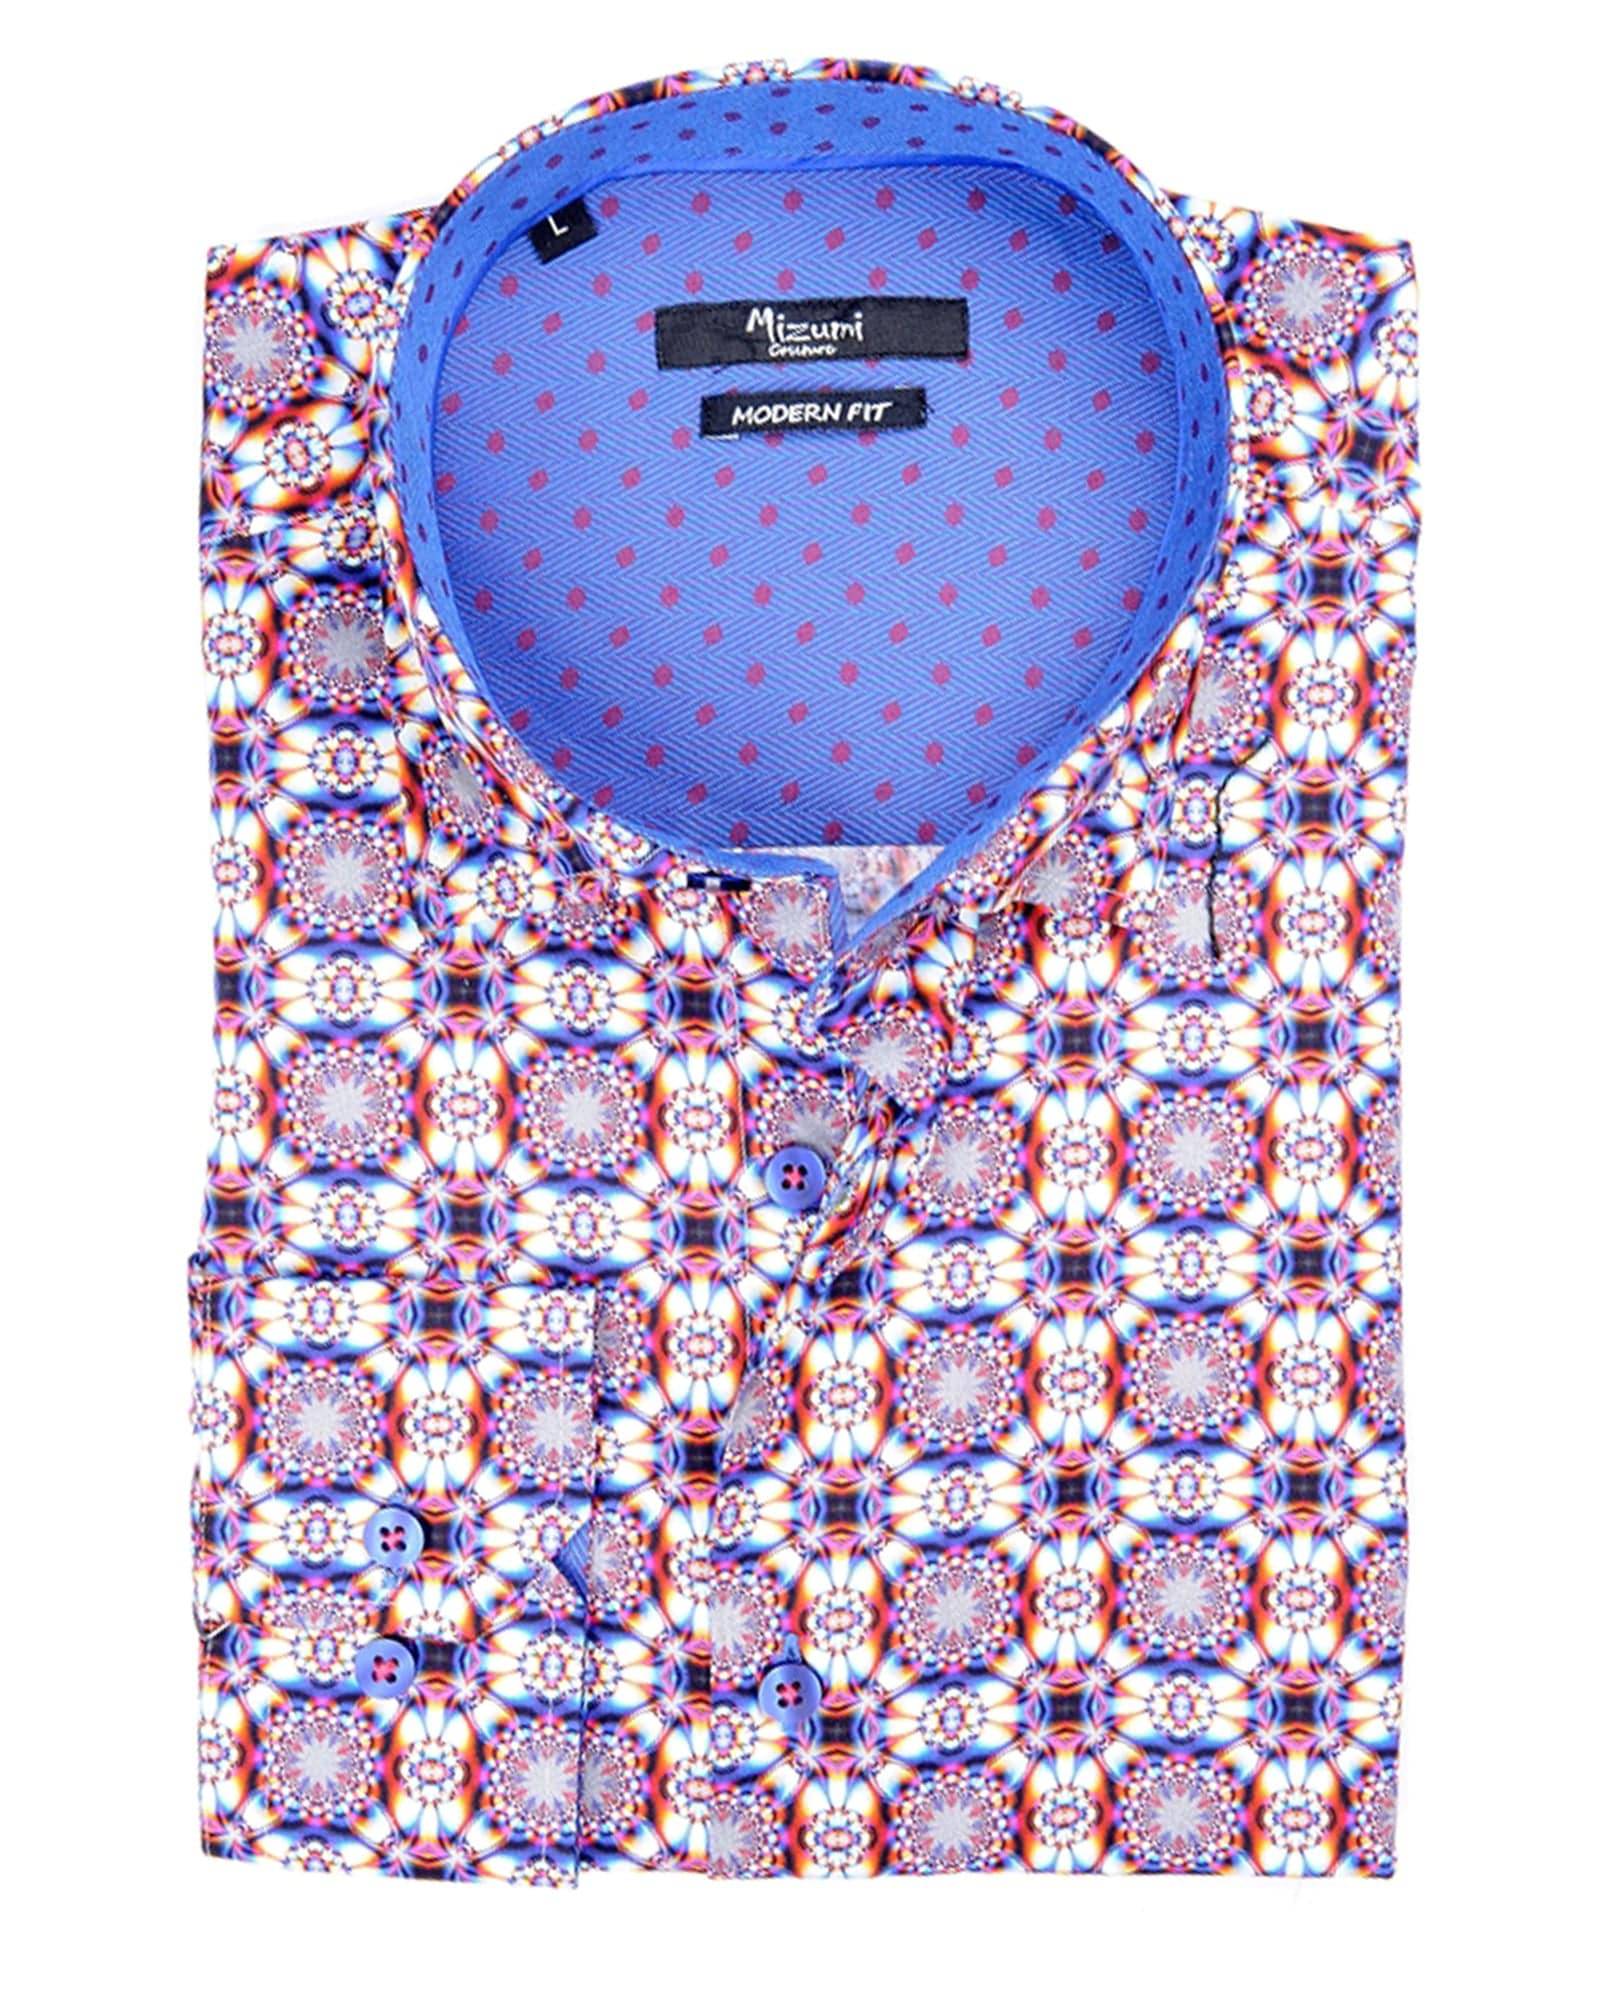 Psychedelic Trip Sport Shirt - Rainwater's Men's Clothing and Tuxedo Rental